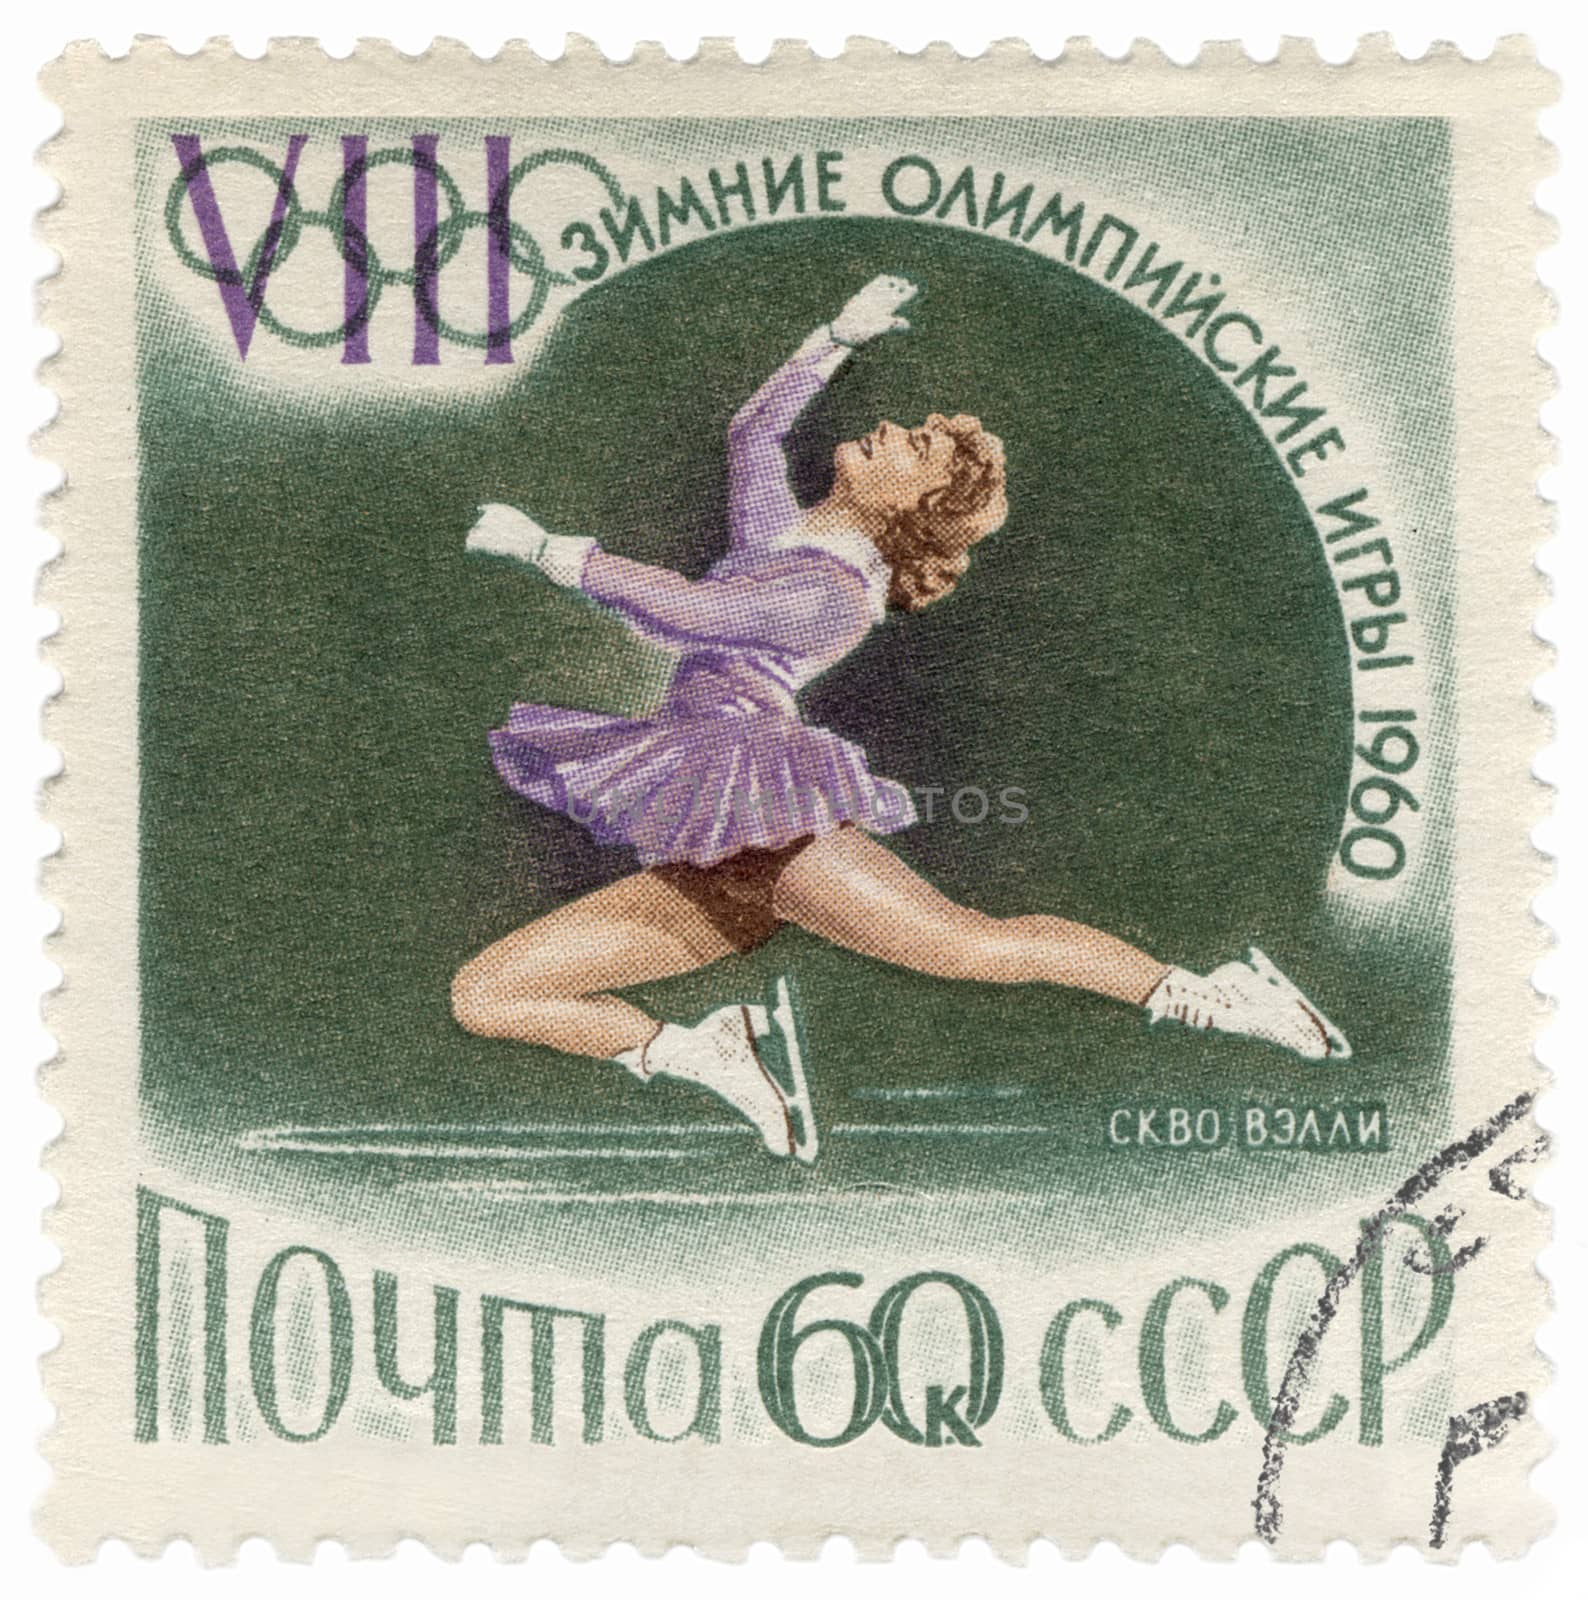 USSR - CIRCA 1960: A post stamp printed in the USSR shows figure skater performance, dedicated to the Olympic Winter Games in Squaw Valley, series, circa 1960